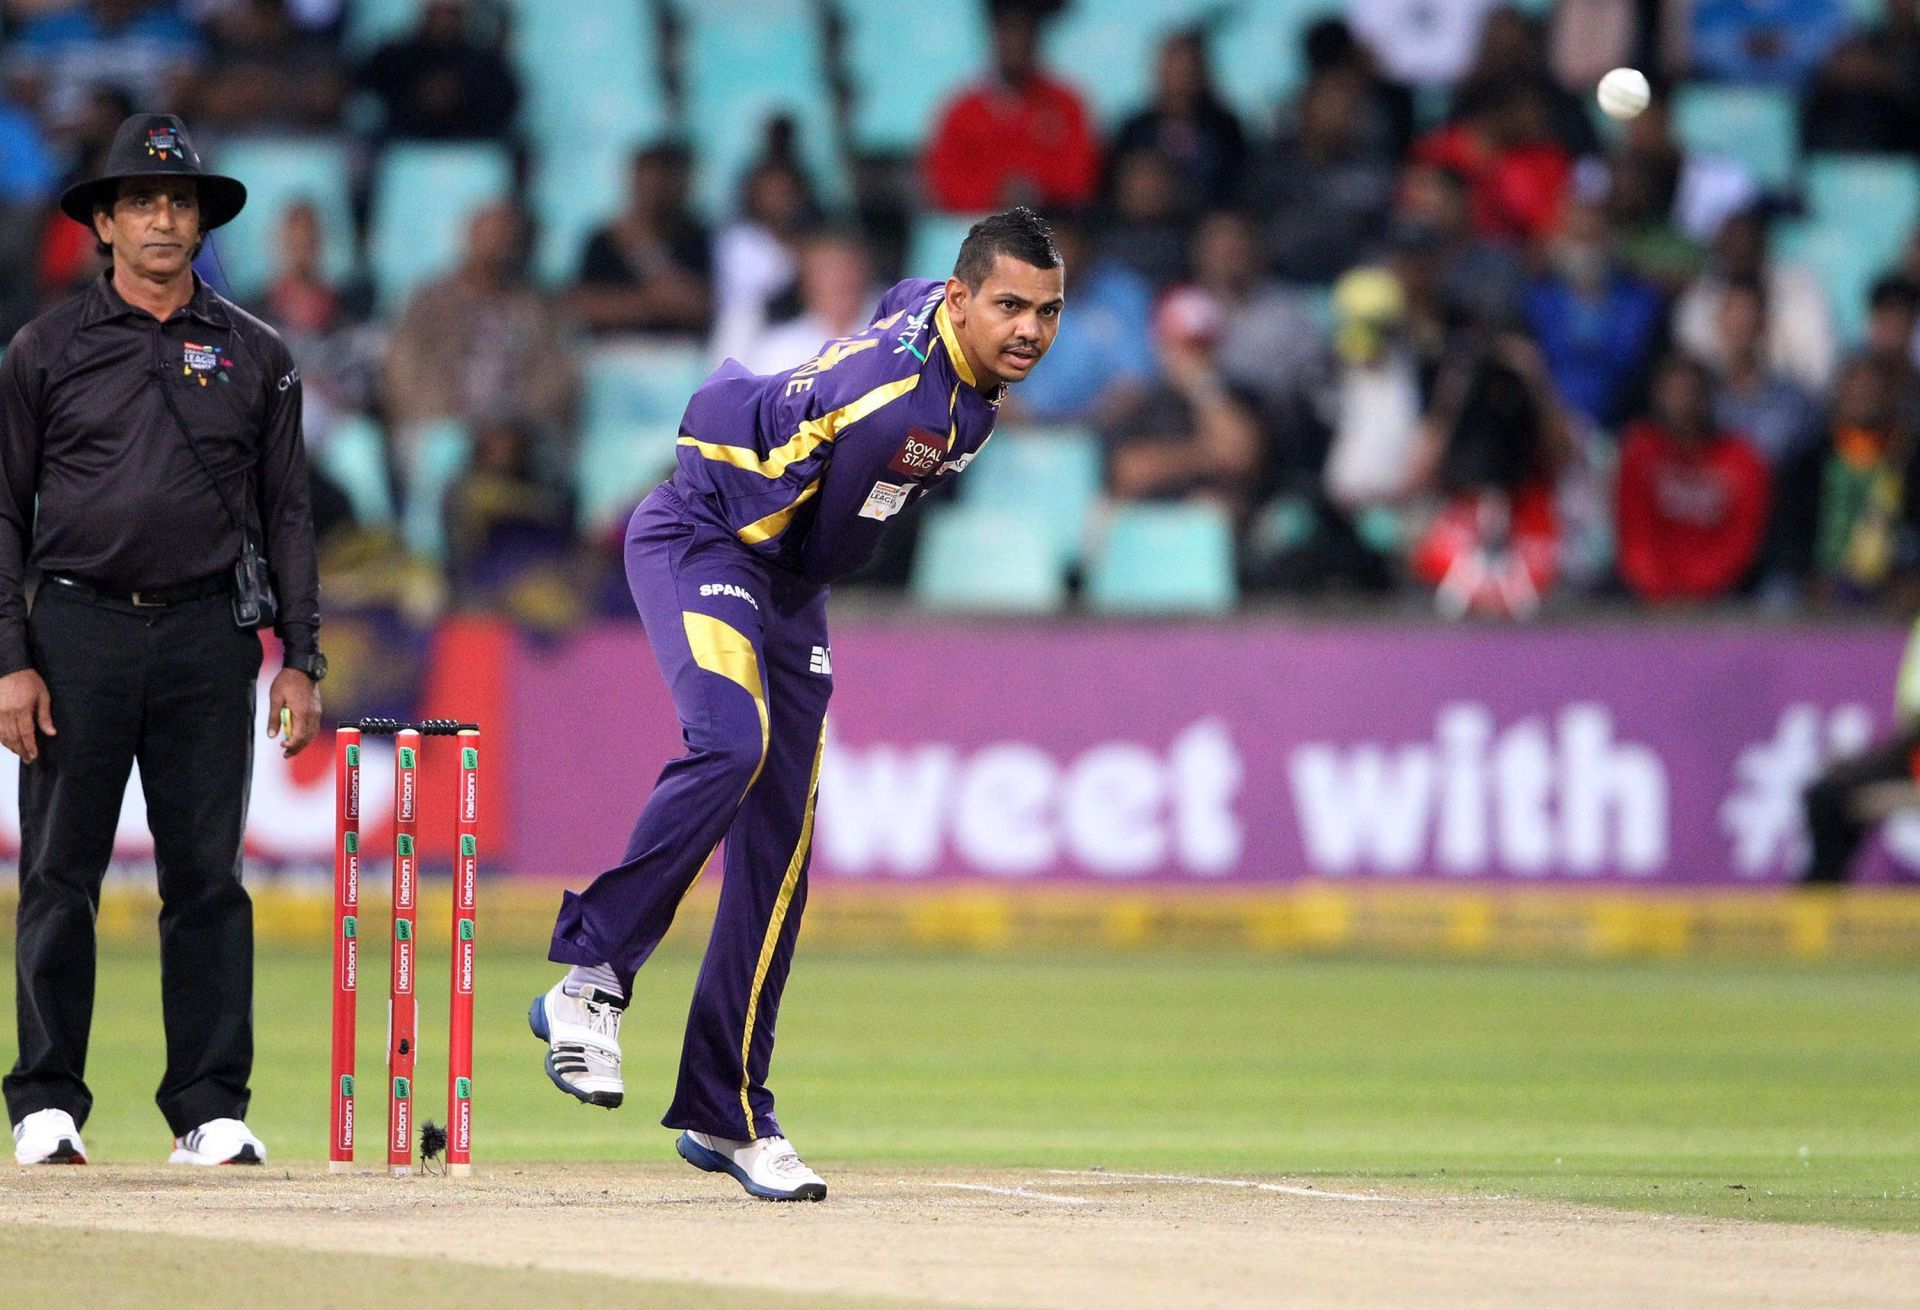 Sunil Narine featured in the 2012 IPL final and will be part of the 2024 final as well for KKR. (Image Credit: Getty Images)